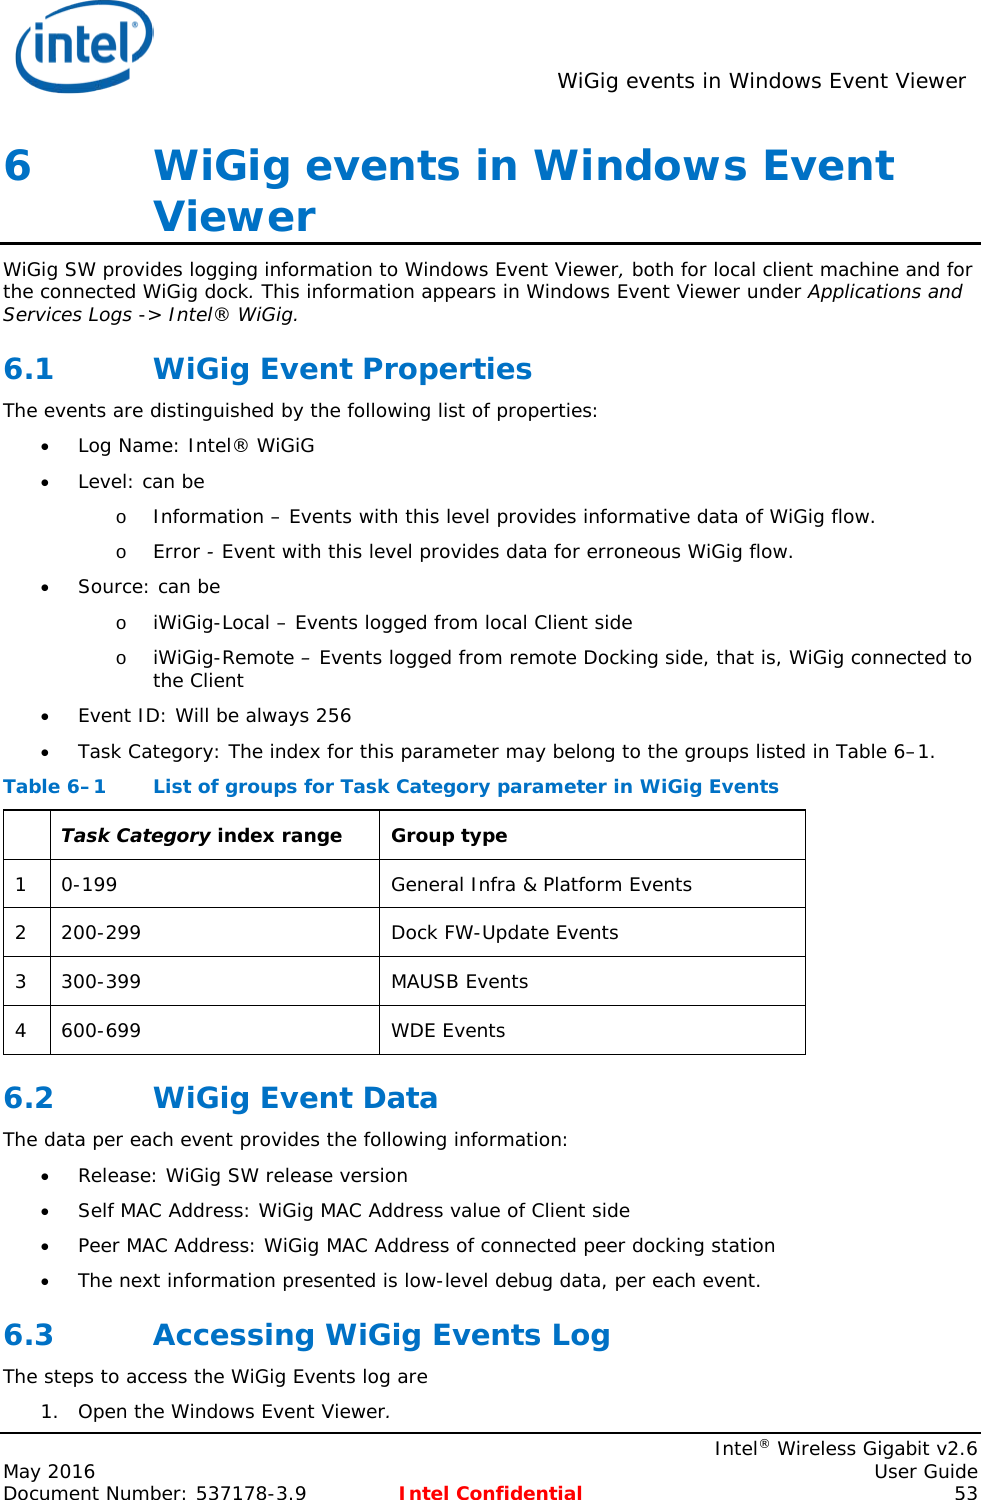  WiGig events in Windows Event Viewer    Intel® Wireless Gigabit v2.6 May 2016    User Guide Document Number: 537178-3.9 Intel Confidential 53 6   WiGig events in Windows Event Viewer WiGig SW provides logging information to Windows Event Viewer, both for local client machine and for the connected WiGig dock. This information appears in Windows Event Viewer under Applications and Services Logs -&gt; Intel® WiGig. 6.1 WiGig Event Properties The events are distinguished by the following list of properties: • Log Name: Intel® WiGiG • Level: can be o Information – Events with this level provides informative data of WiGig flow. o Error - Event with this level provides data for erroneous WiGig flow. • Source: can be o iWiGig-Local – Events logged from local Client side o iWiGig-Remote – Events logged from remote Docking side, that is, WiGig connected to the Client • Event ID: Will be always 256 • Task Category: The index for this parameter may belong to the groups listed in Table 6–1. Table 6–1  List of groups for Task Category parameter in WiGig Events  Task Category index range Group type 1  0-199 General Infra &amp; Platform Events 2  200-299 Dock FW-Update Events 3  300-399 MAUSB Events 4  600-699 WDE Events 6.2 WiGig Event Data The data per each event provides the following information: • Release: WiGig SW release version • Self MAC Address: WiGig MAC Address value of Client side • Peer MAC Address: WiGig MAC Address of connected peer docking station • The next information presented is low-level debug data, per each event. 6.3 Accessing WiGig Events Log The steps to access the WiGig Events log are 1. Open the Windows Event Viewer. 